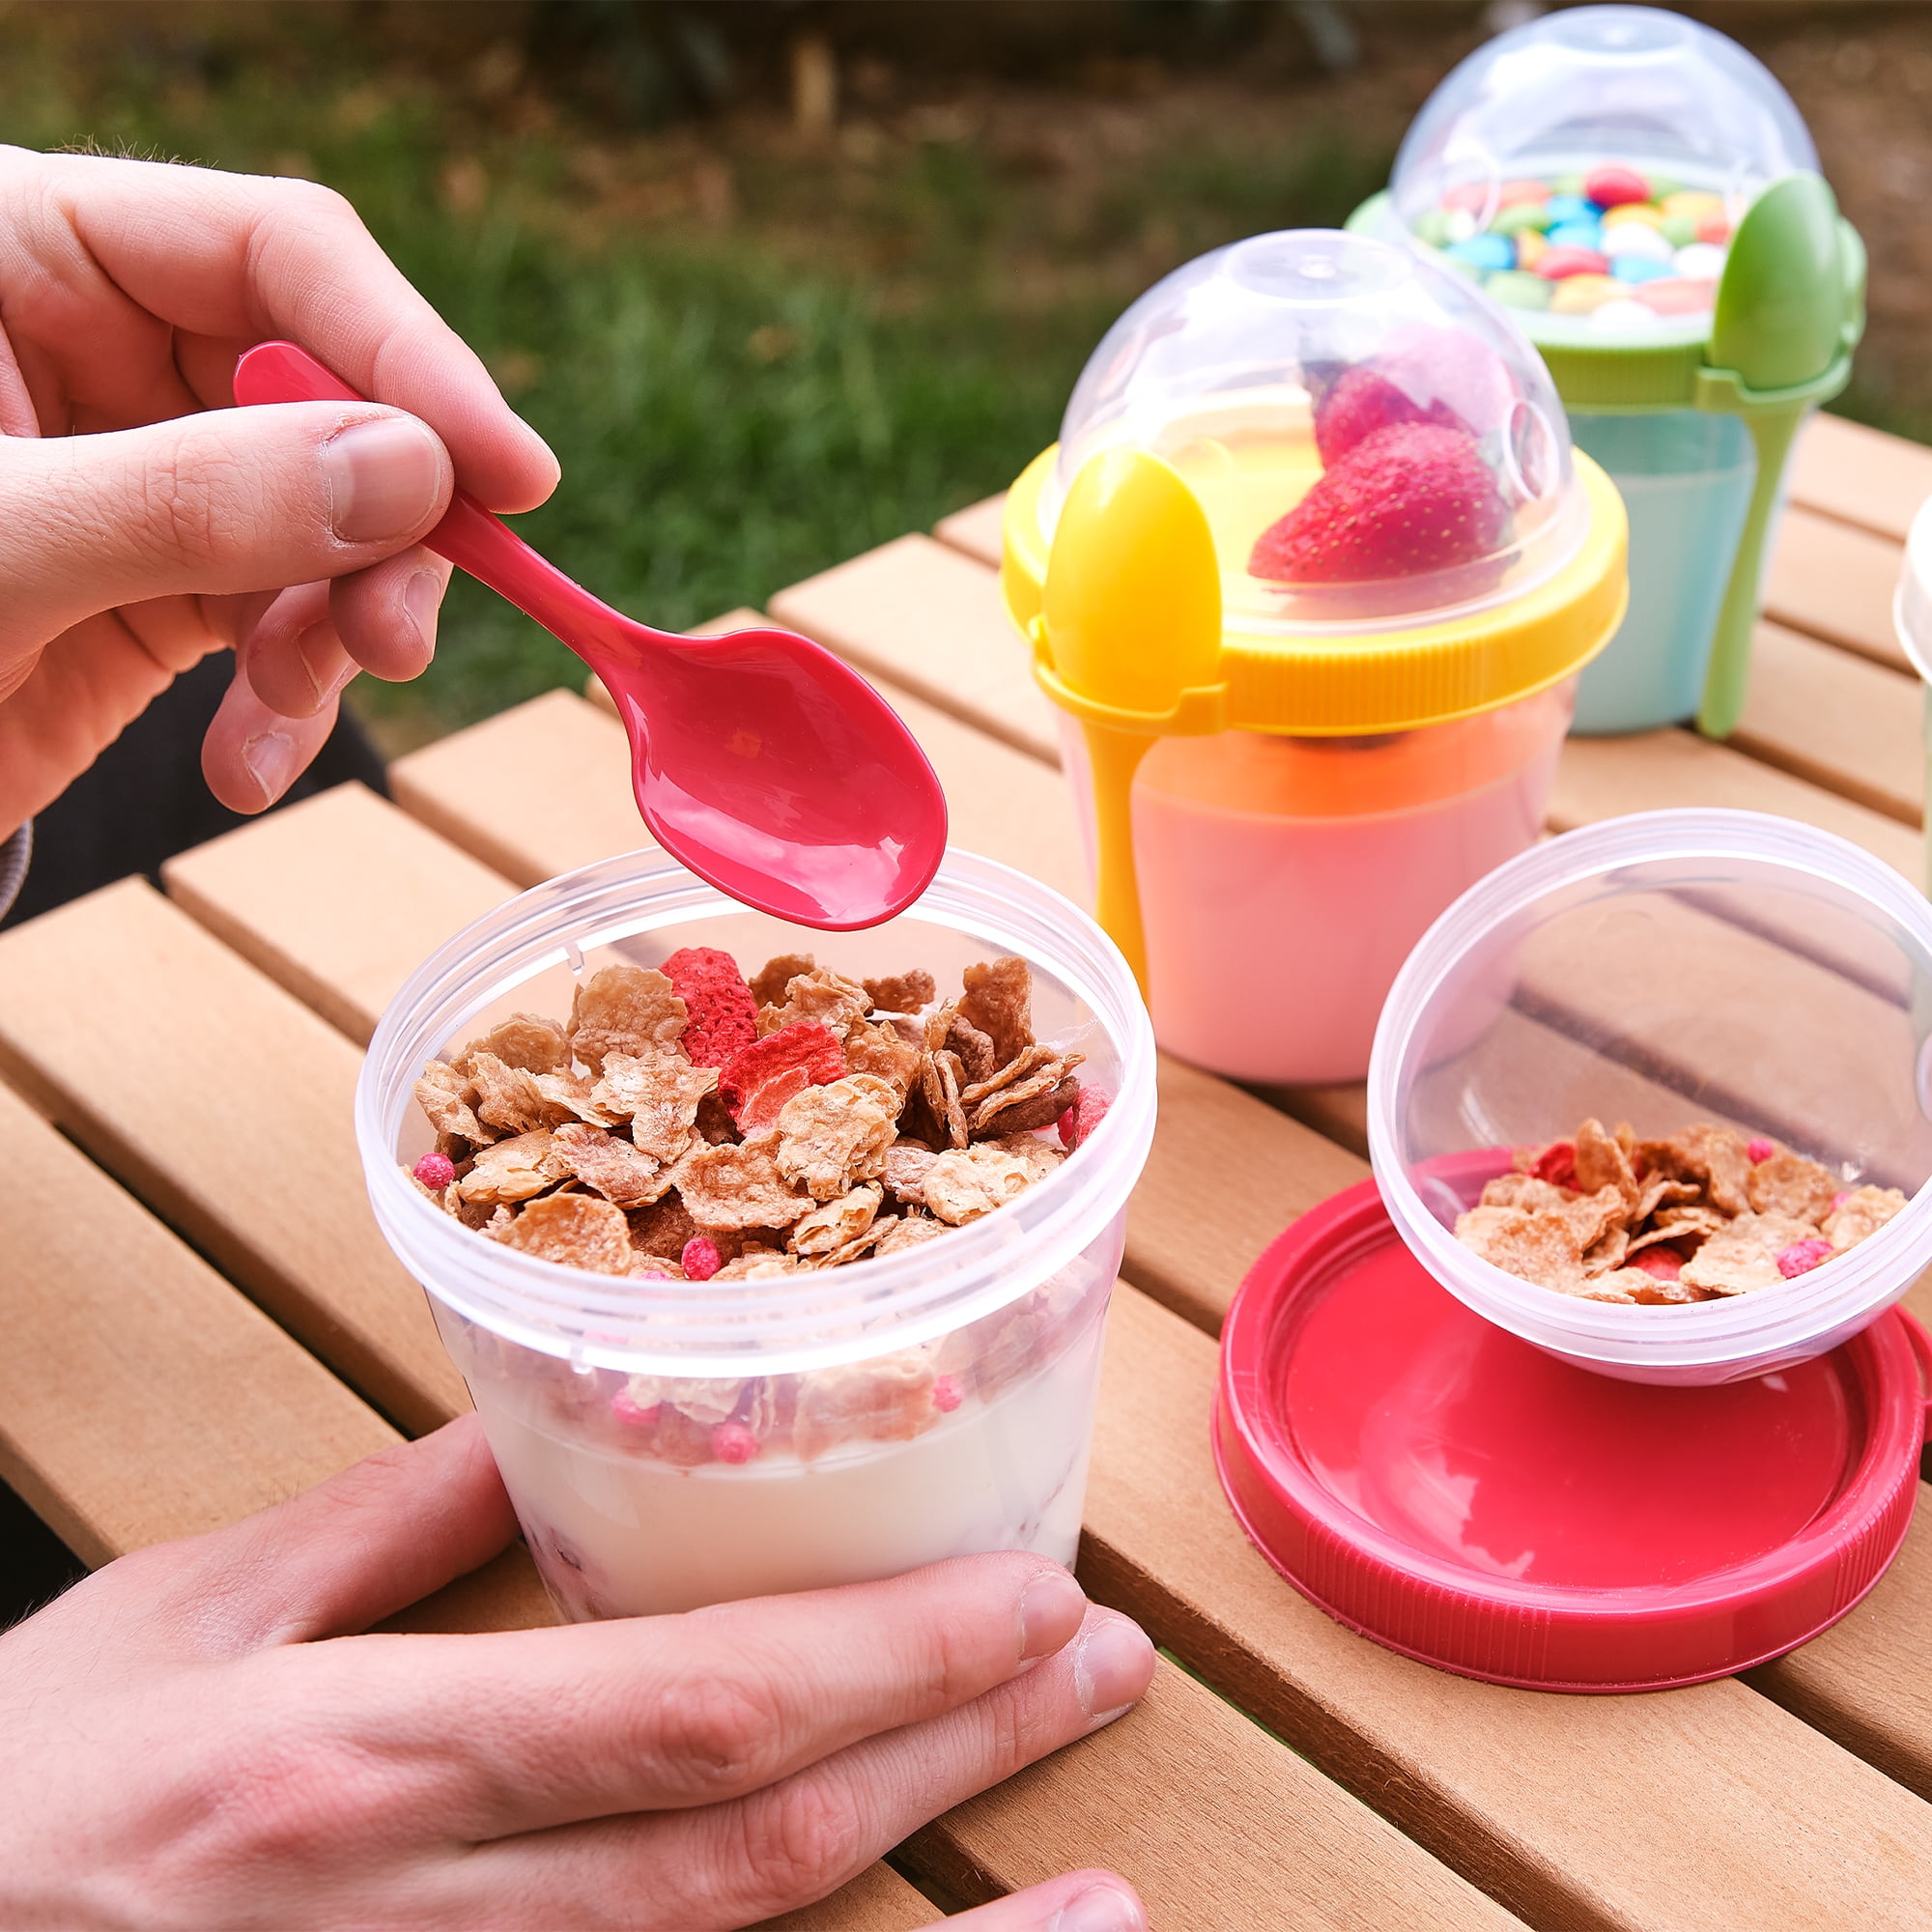  Daasigwaa Breakfast On The Go Cups, Salad Cup To Go, Take And  Go Yogurt Cereal Overnight Oats Snack Parfait Containers & Salad Dressing  Holder With Fork For Lunch, Fruit & Vegetable